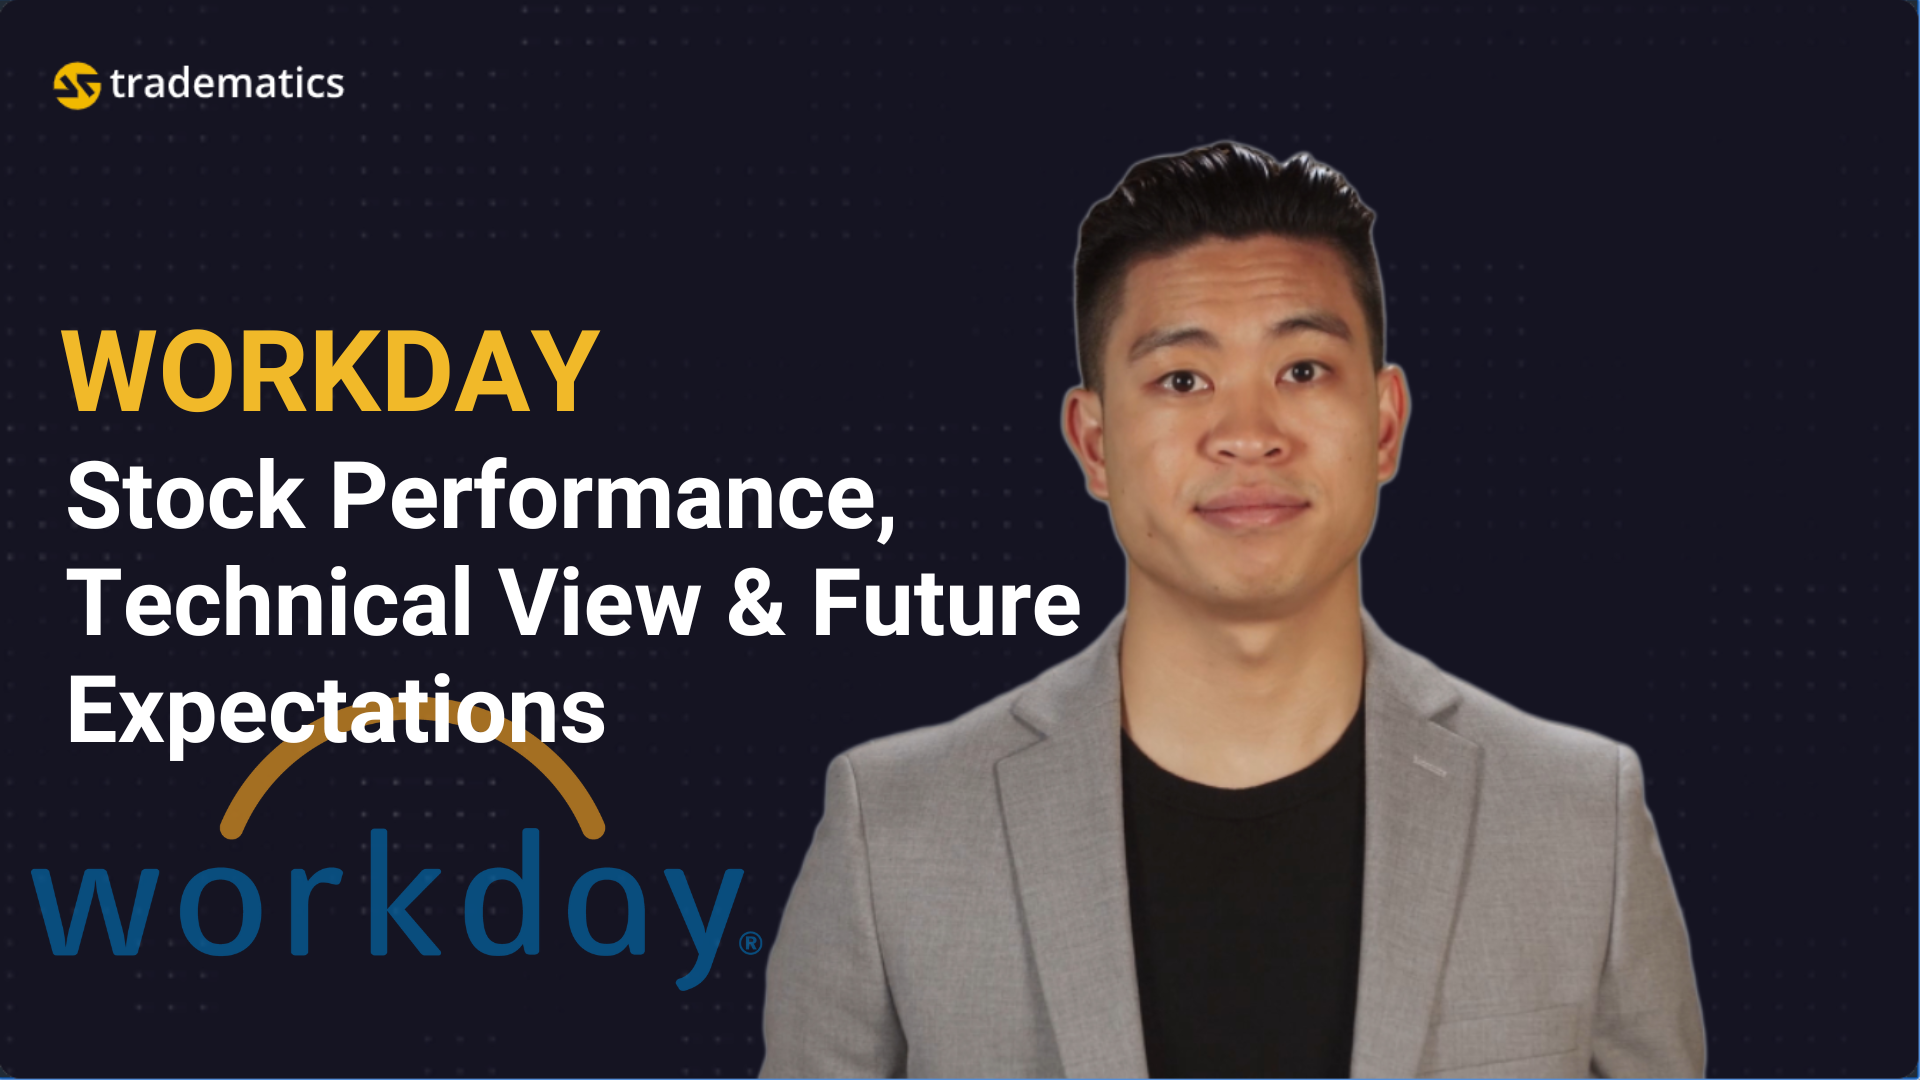 Tradematics | #23 WORKDAY  | Stock Performance, Technical View & Future Expectations